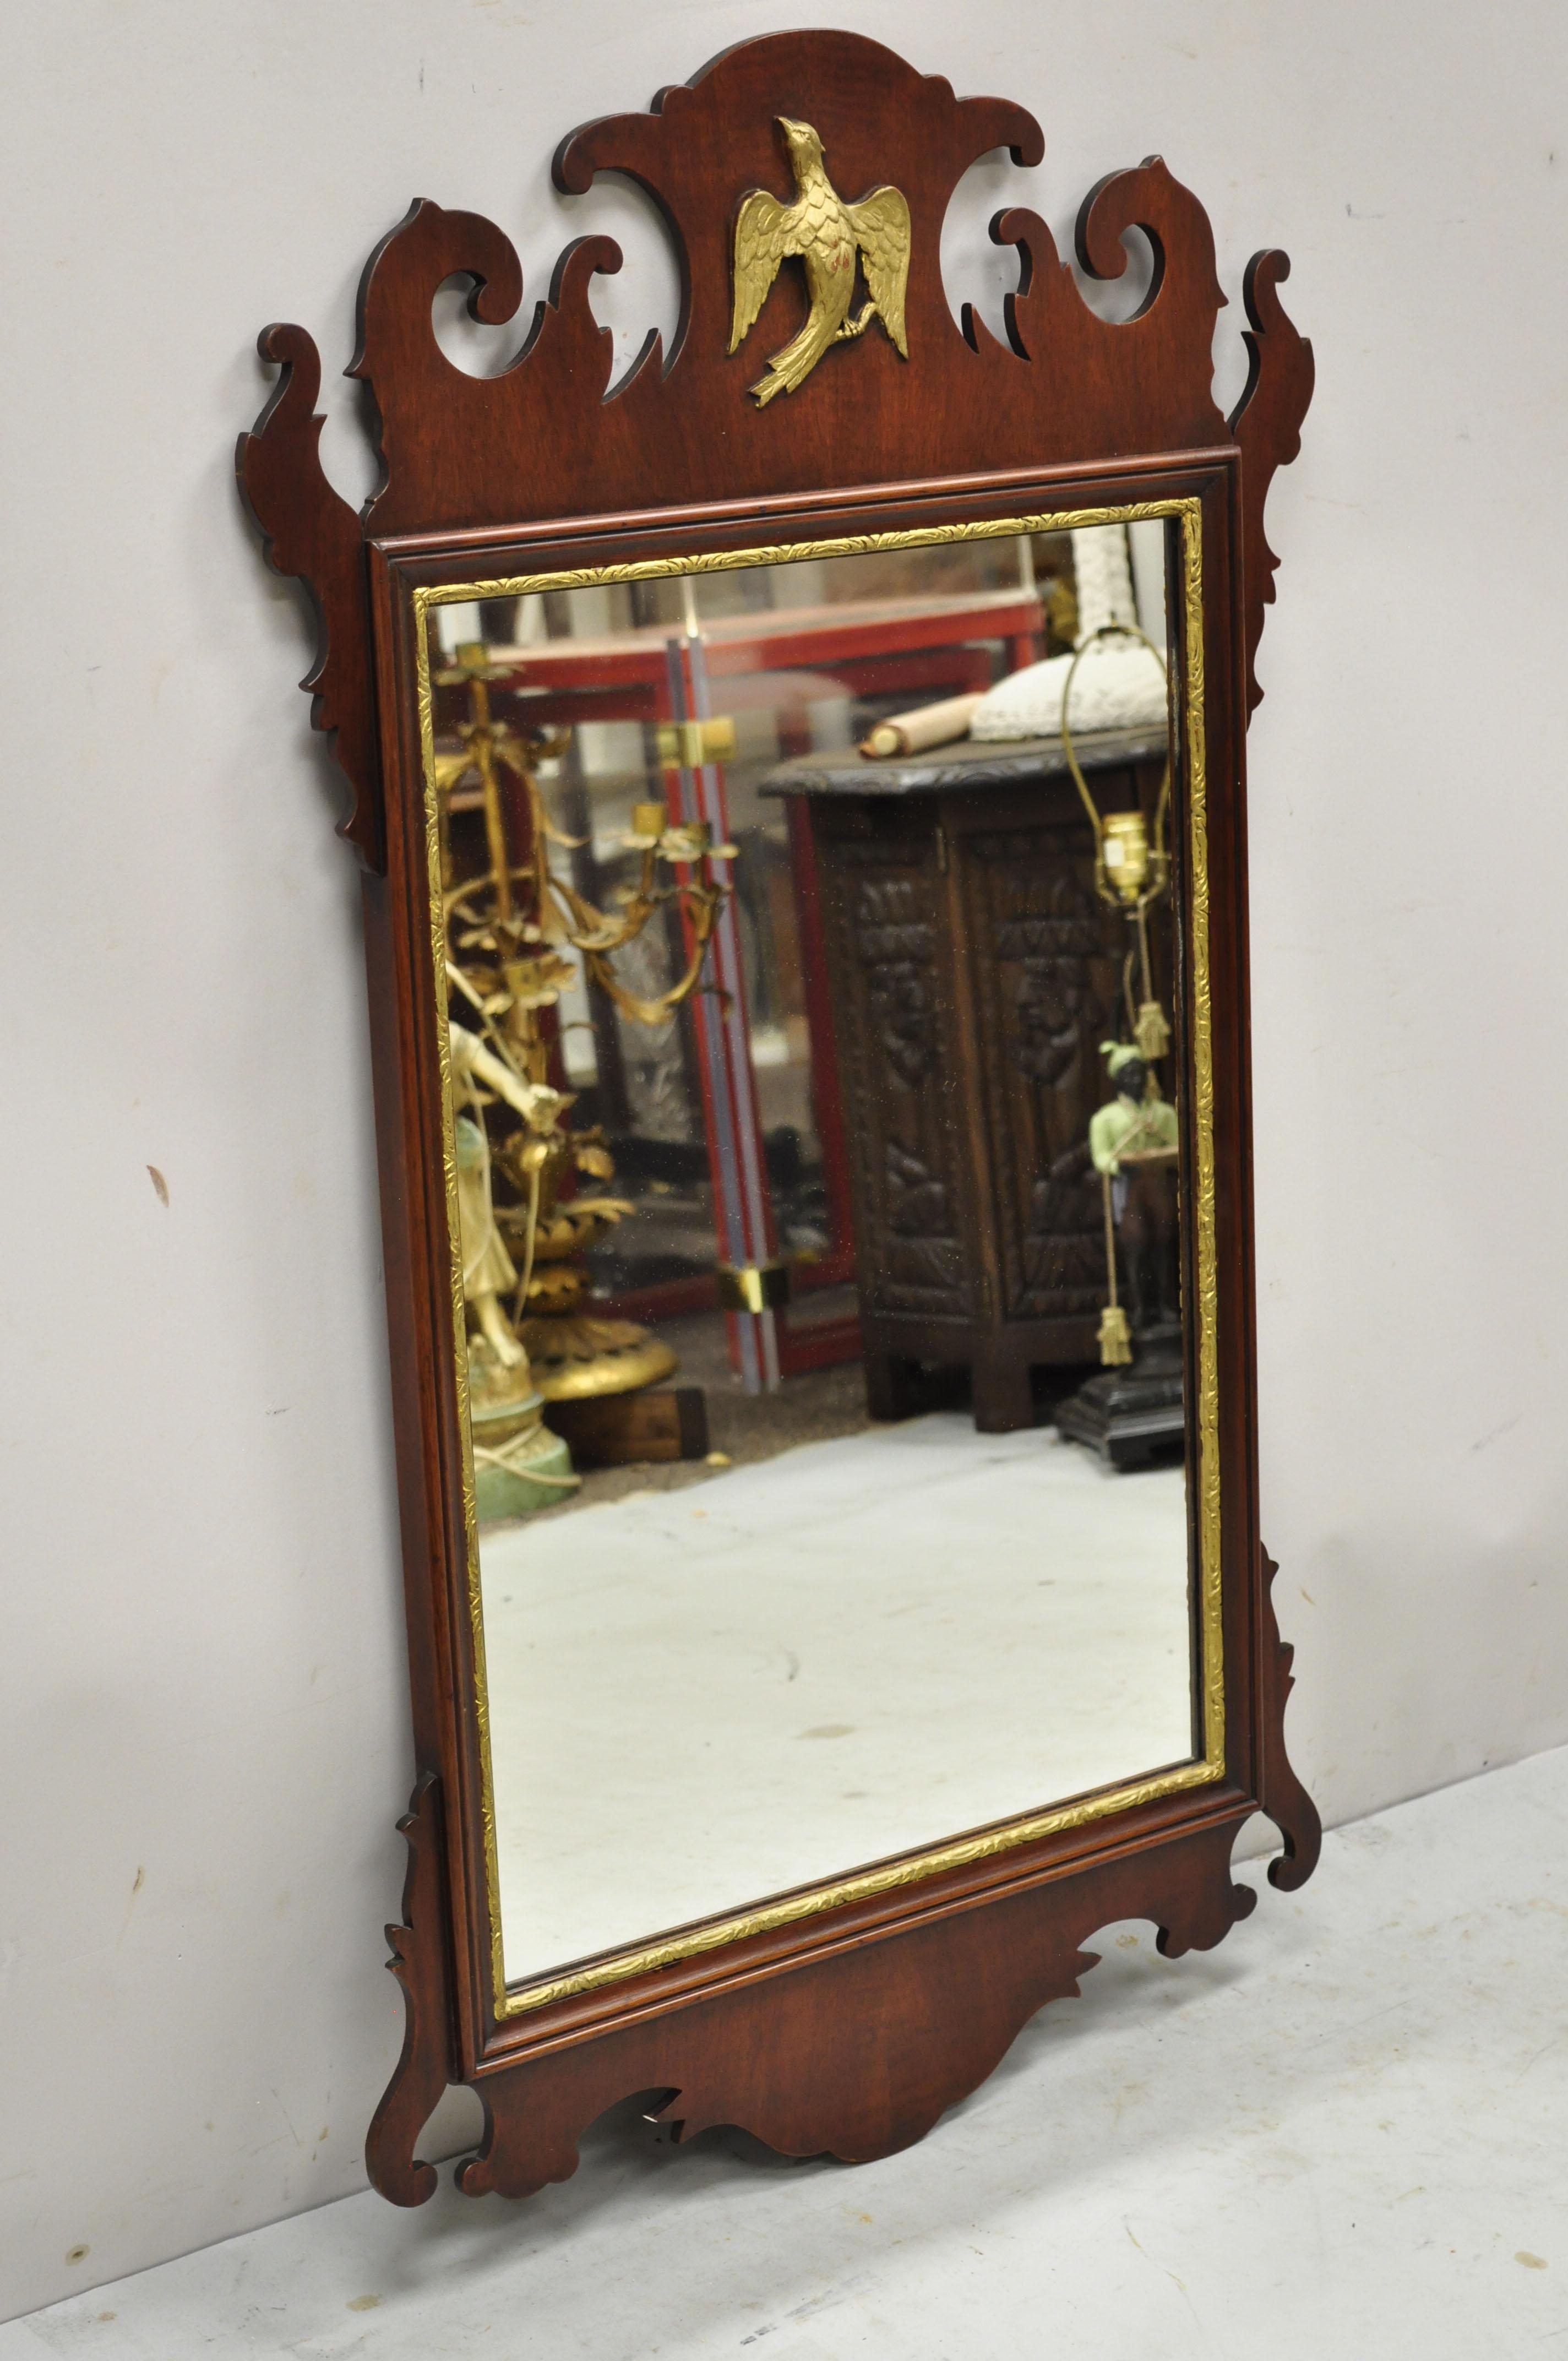 Antique Kindel oxford mahogany frame federal mirror wall gold gilt carved eagle. Item features gold gilt carved eagle, carved and shaped frame, wood frame, beautiful wood grain, original label, very nice antique item, quality American craftsmanship,